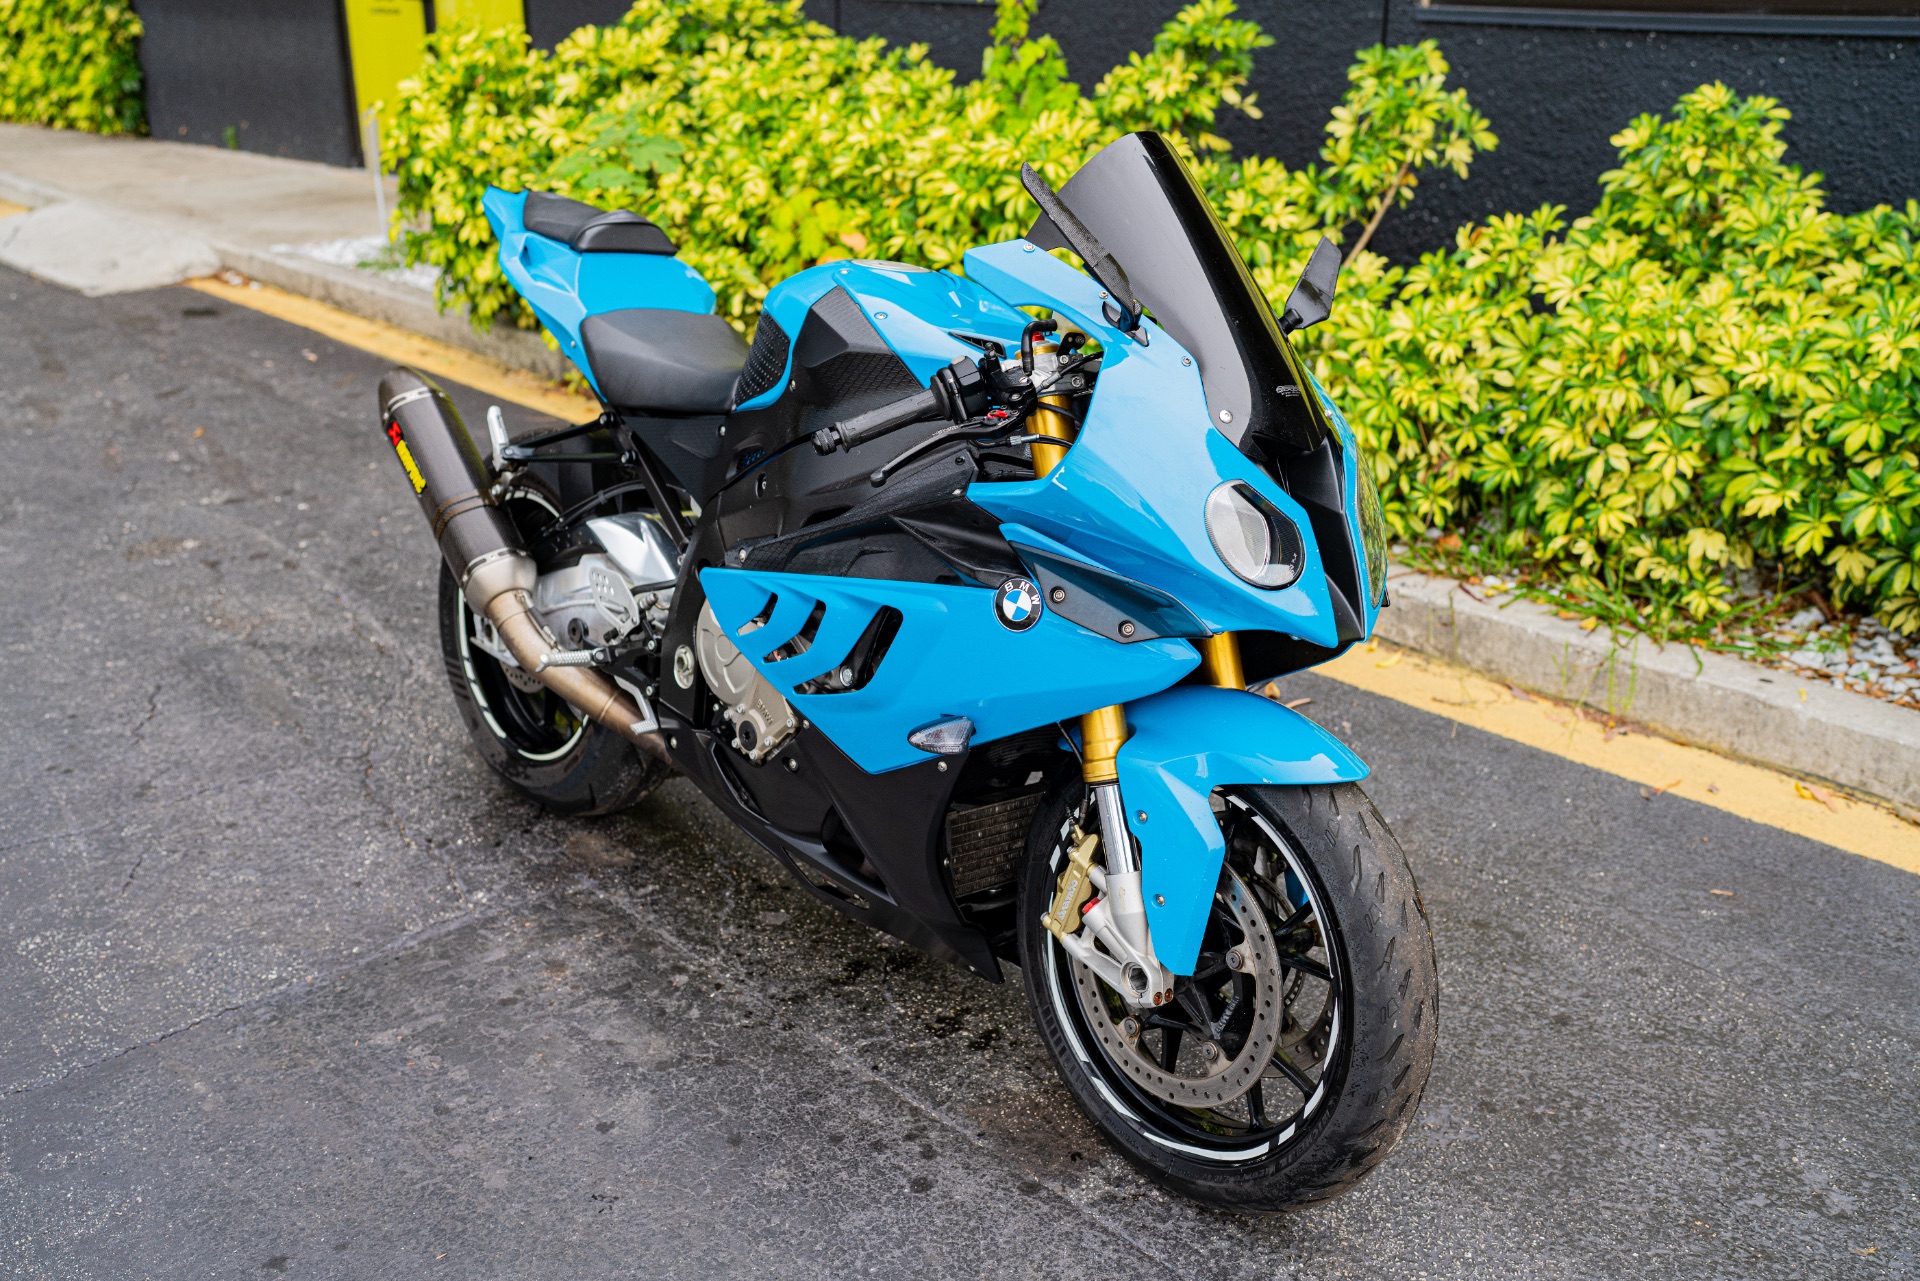 2014 BMW S 1000 RR in Jacksonville, Florida - Photo 6